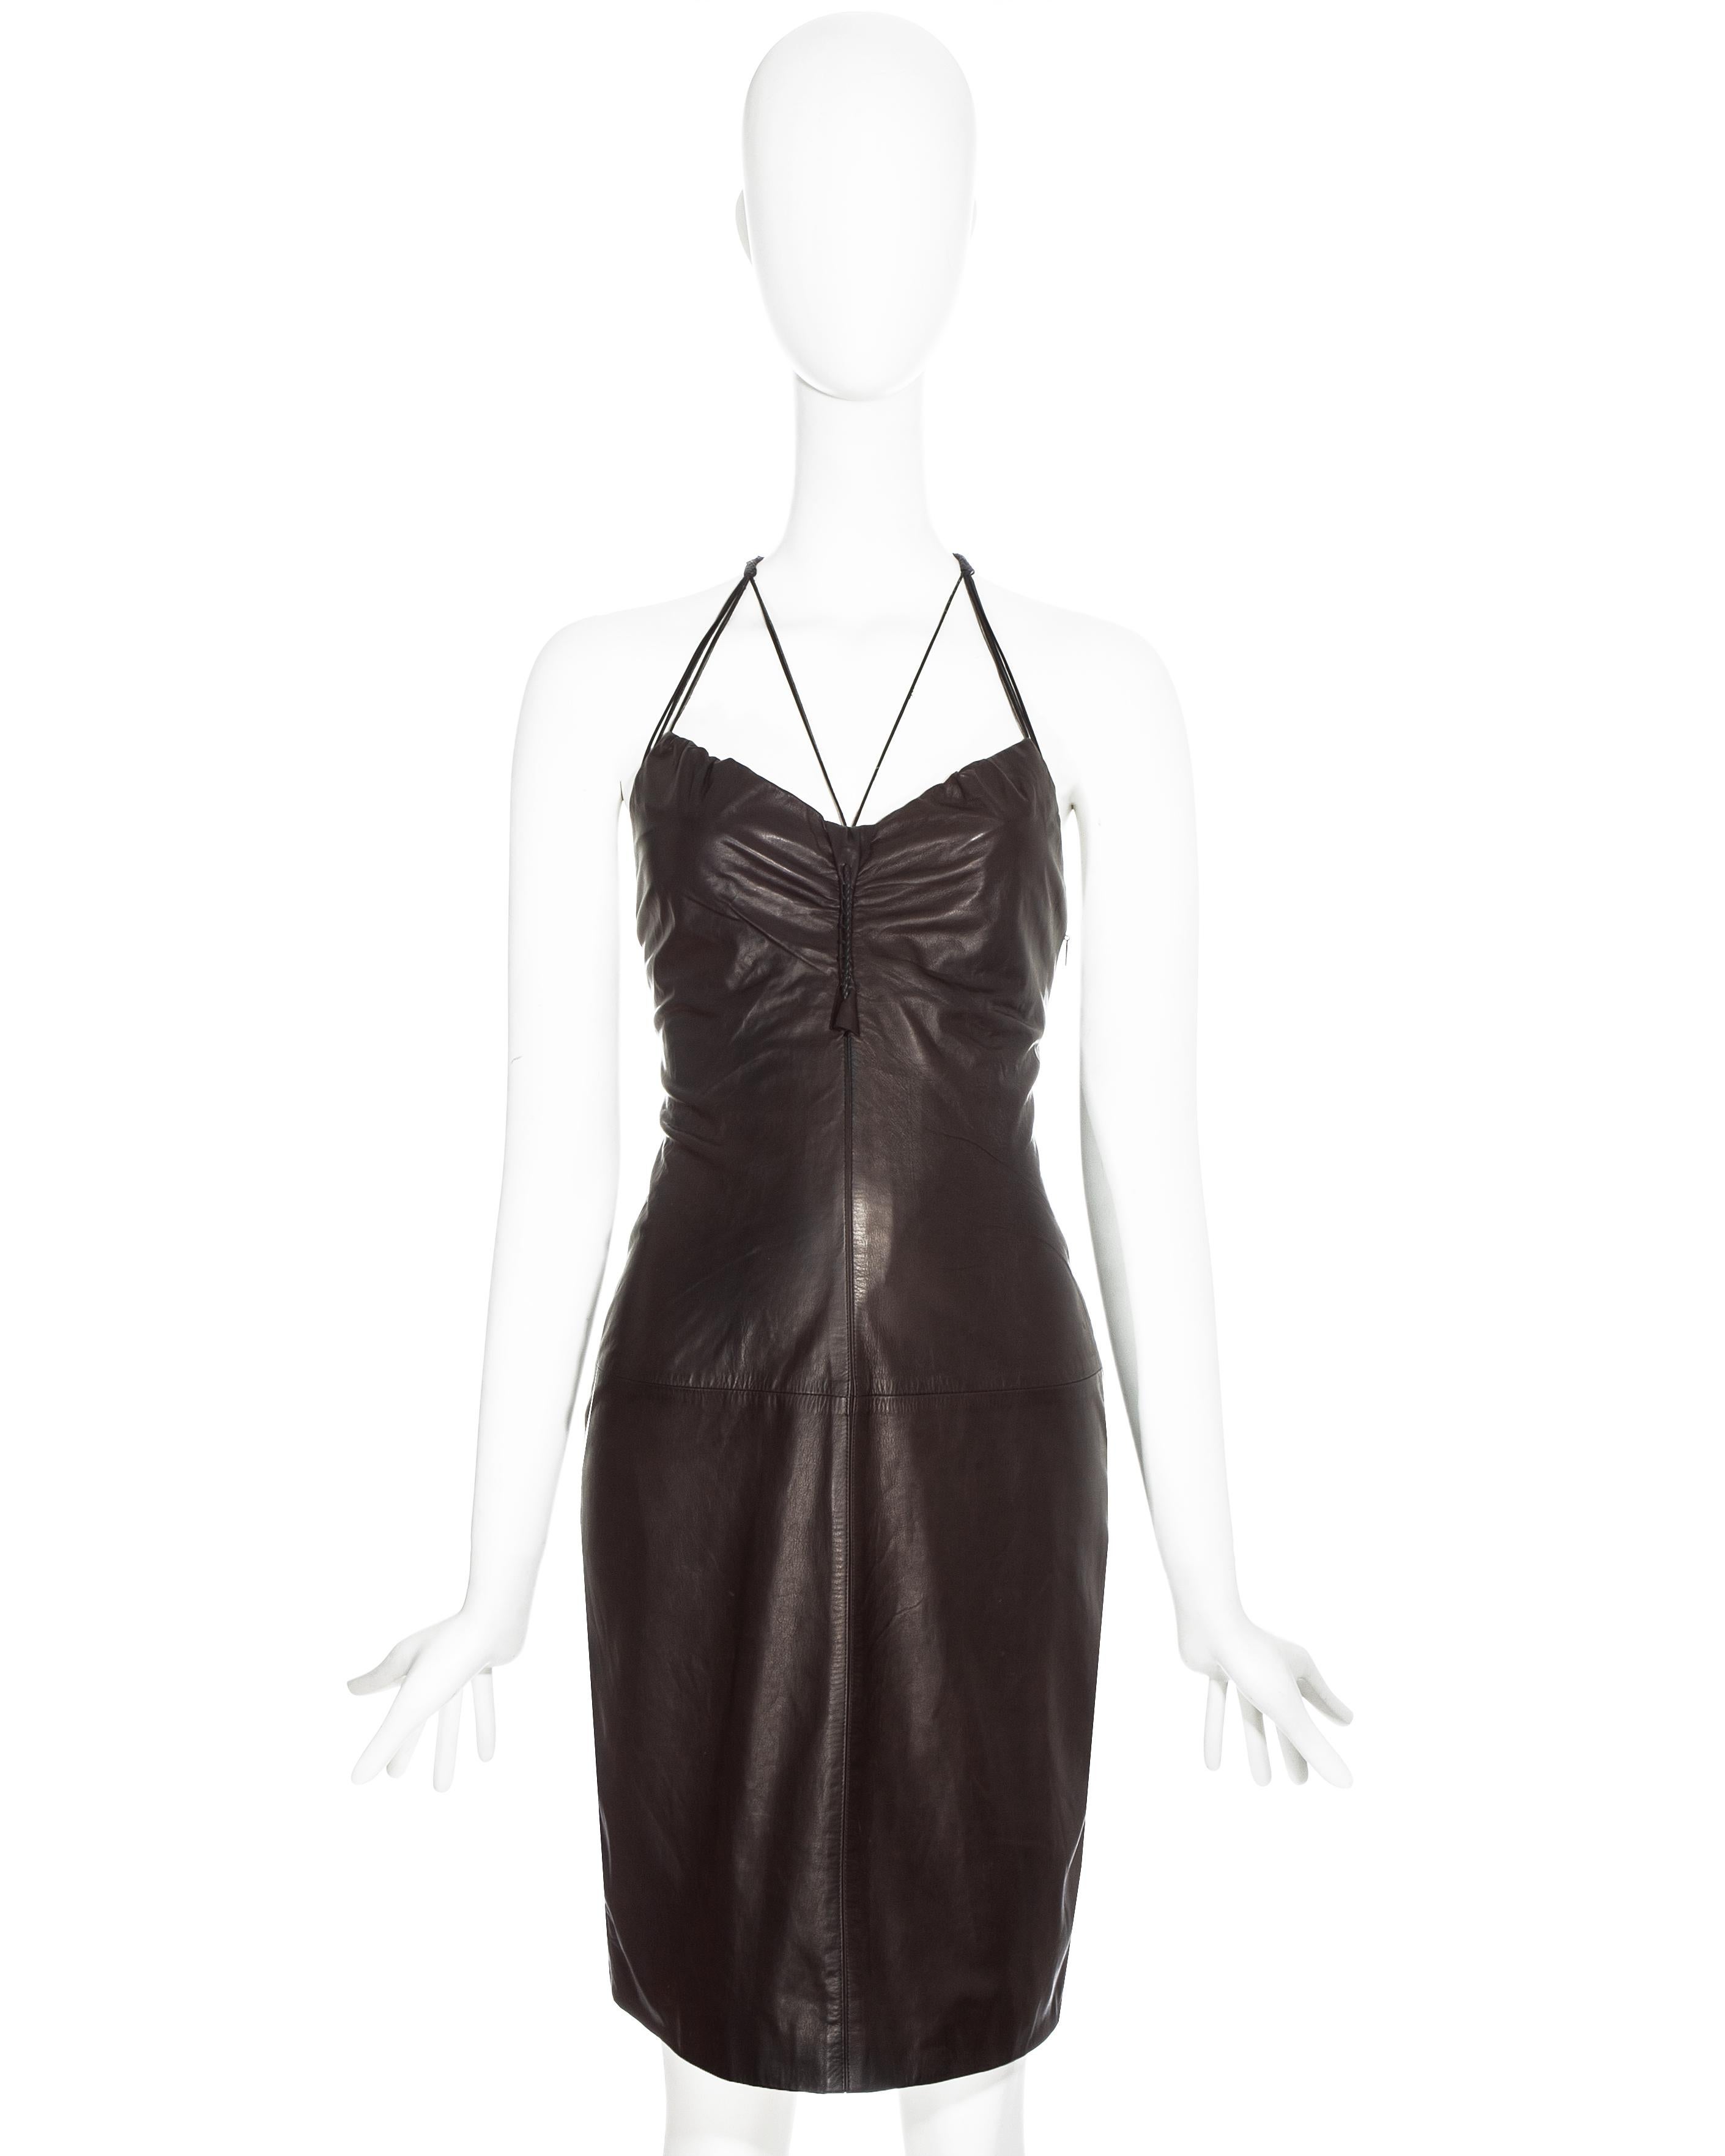 Gucci by Tom Ford brown leather dress with braided halter-neck straps and invisible zip fastening.

Spring-Summer 2003